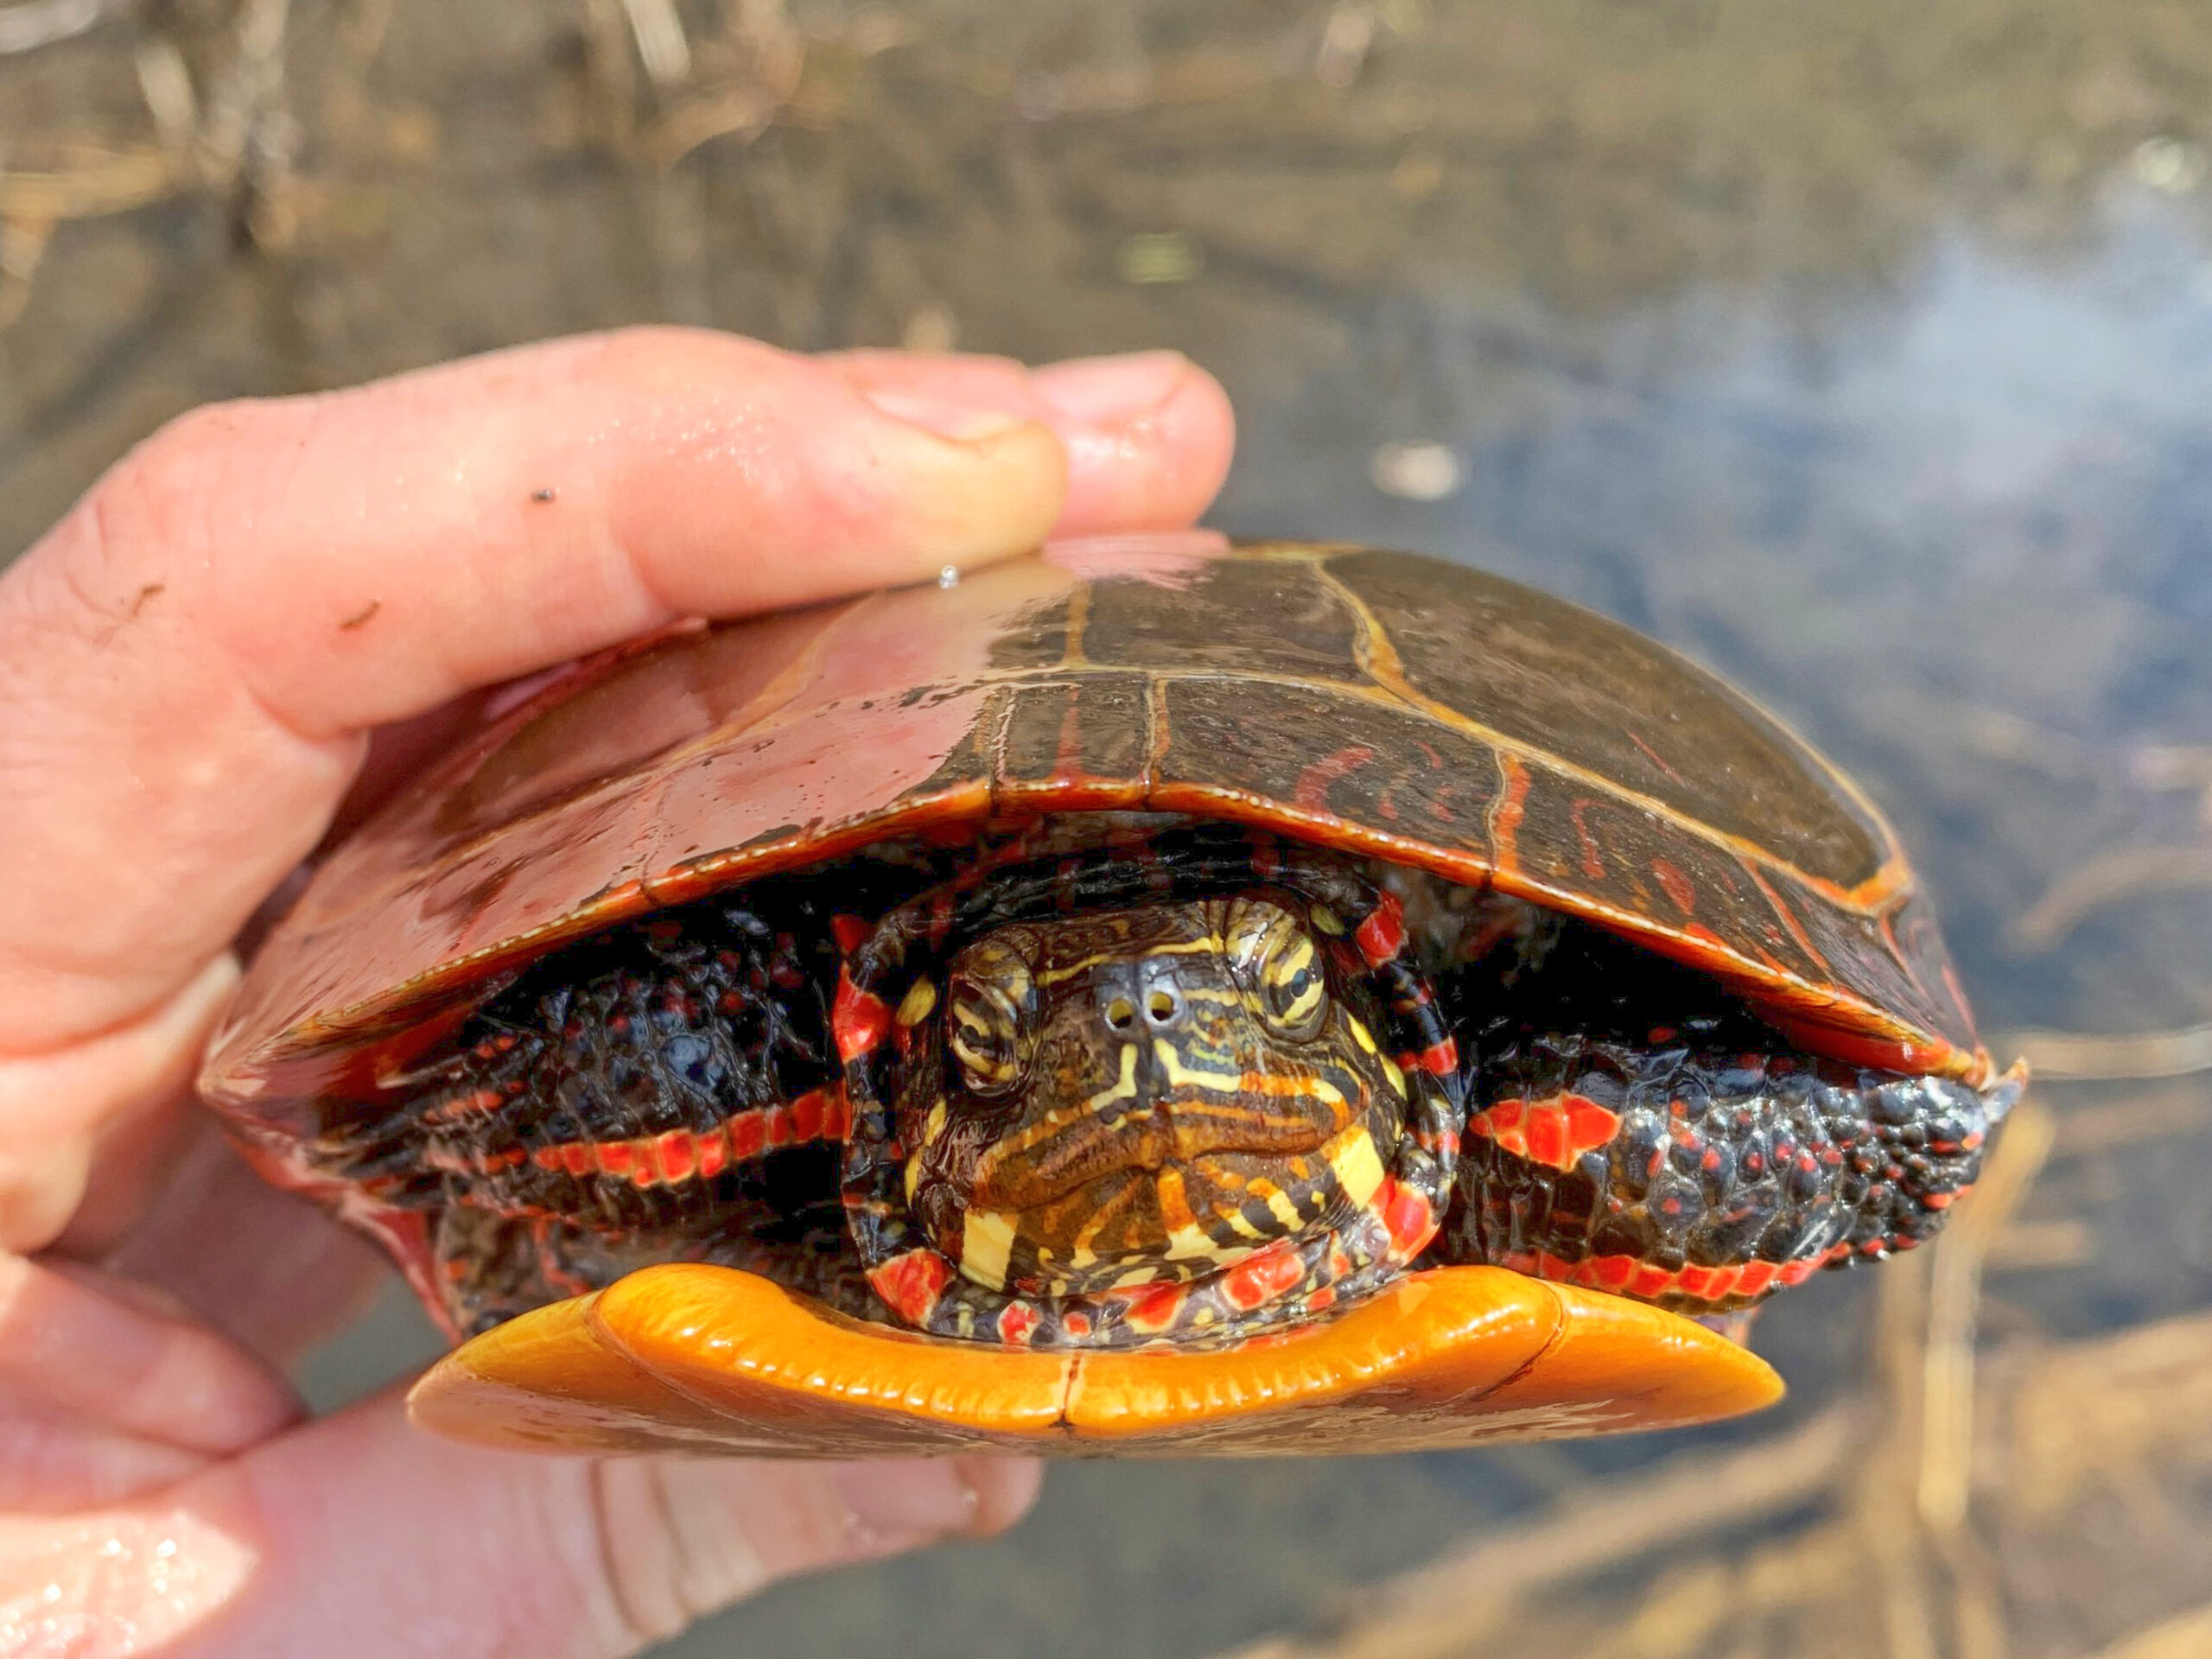 Bringing home a native Vermont wild turtle to keep as a pet is illegal because it can be harmful for the individual animal and local turtle populations.